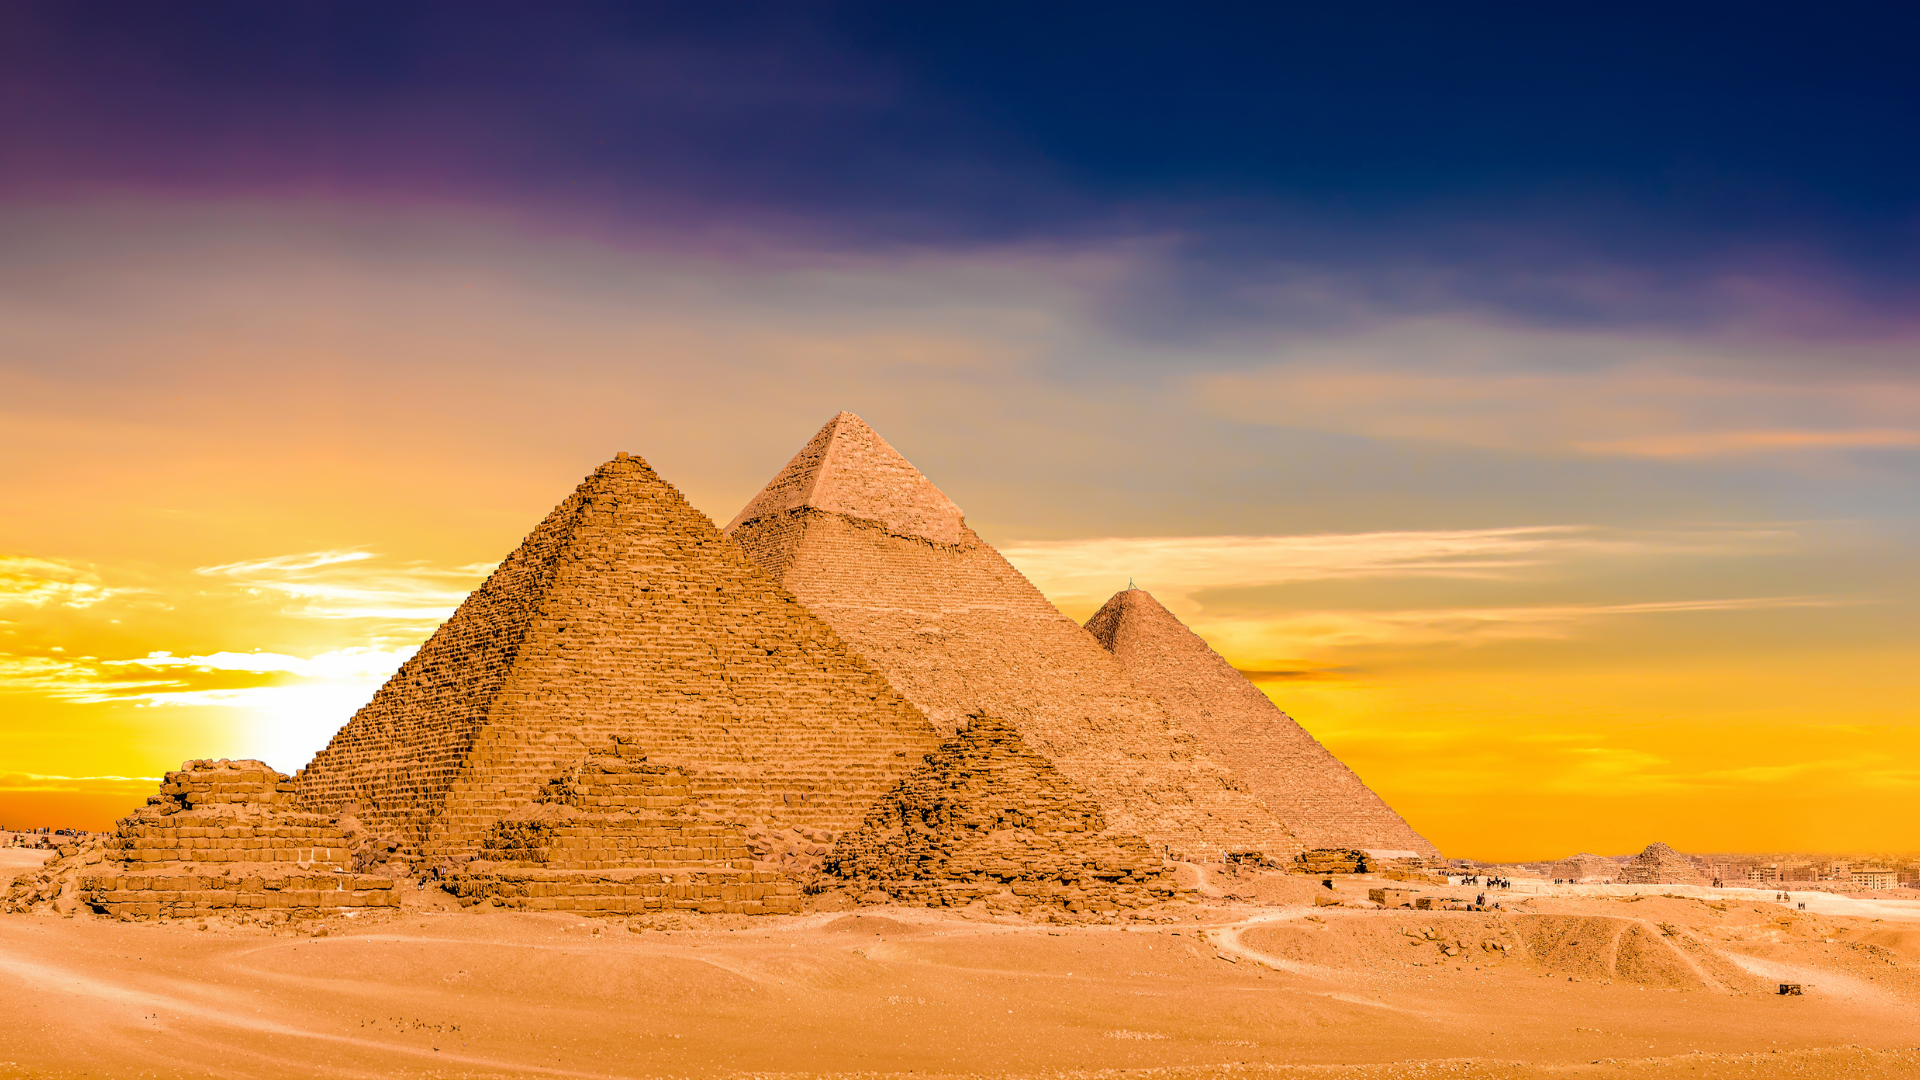 Step back in time and explore the enigmatic pyramids of Giza, one of the ancient Seven Wonders of the World. Marvel at the magnificence of the Great Pyramid of Khufu, along with the mystical Sphinx, while delving into the enigmatic history of the pharaohs. Uncover the secrets of these colossal structures and immerse yourself in the rich cultural heritage of Egypt.